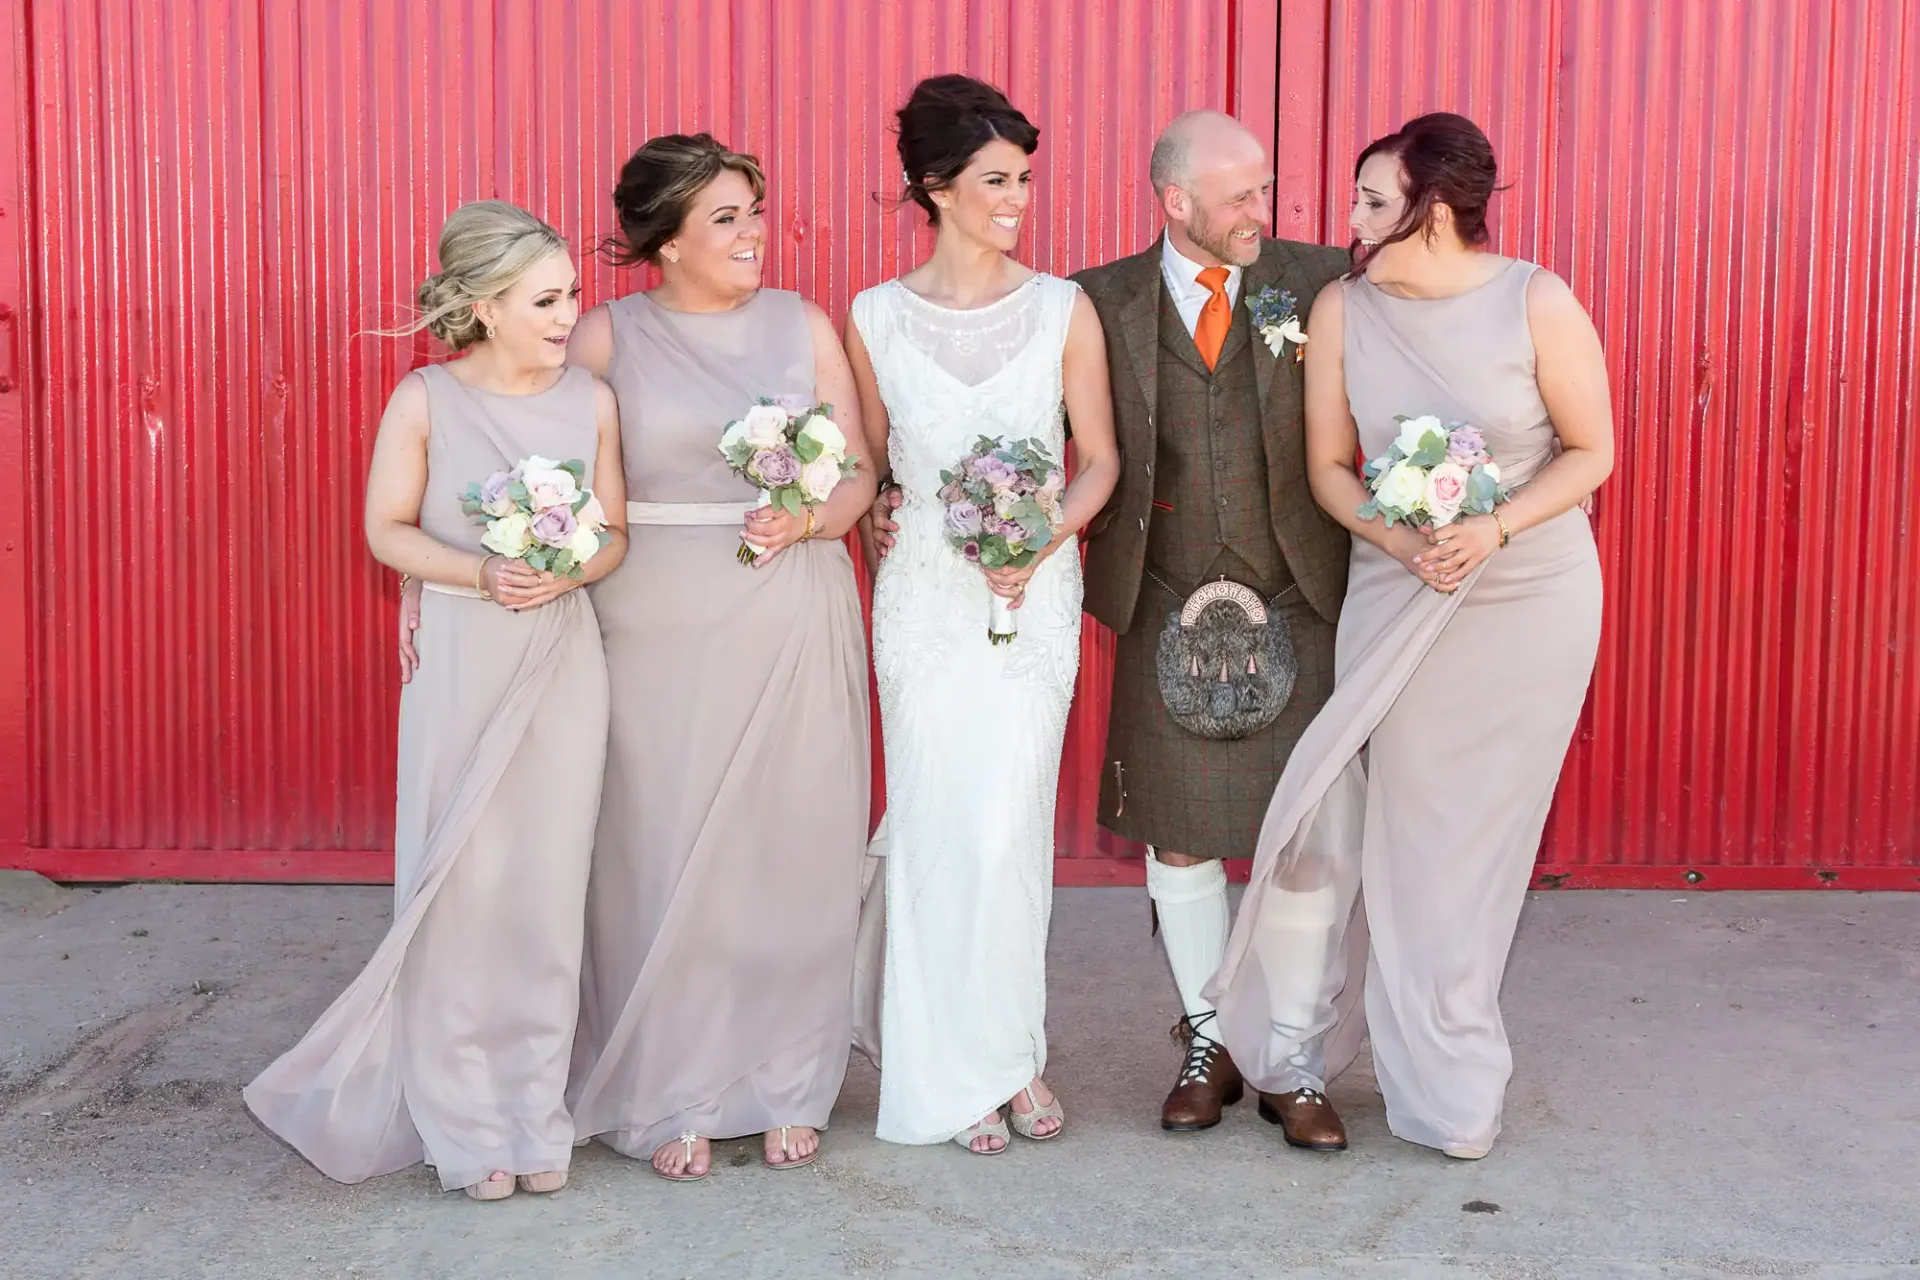 A bride in white and three bridesmaids in taupe dresses laugh with a bearded groom in a traditional kilt, standing in front of a red wall.